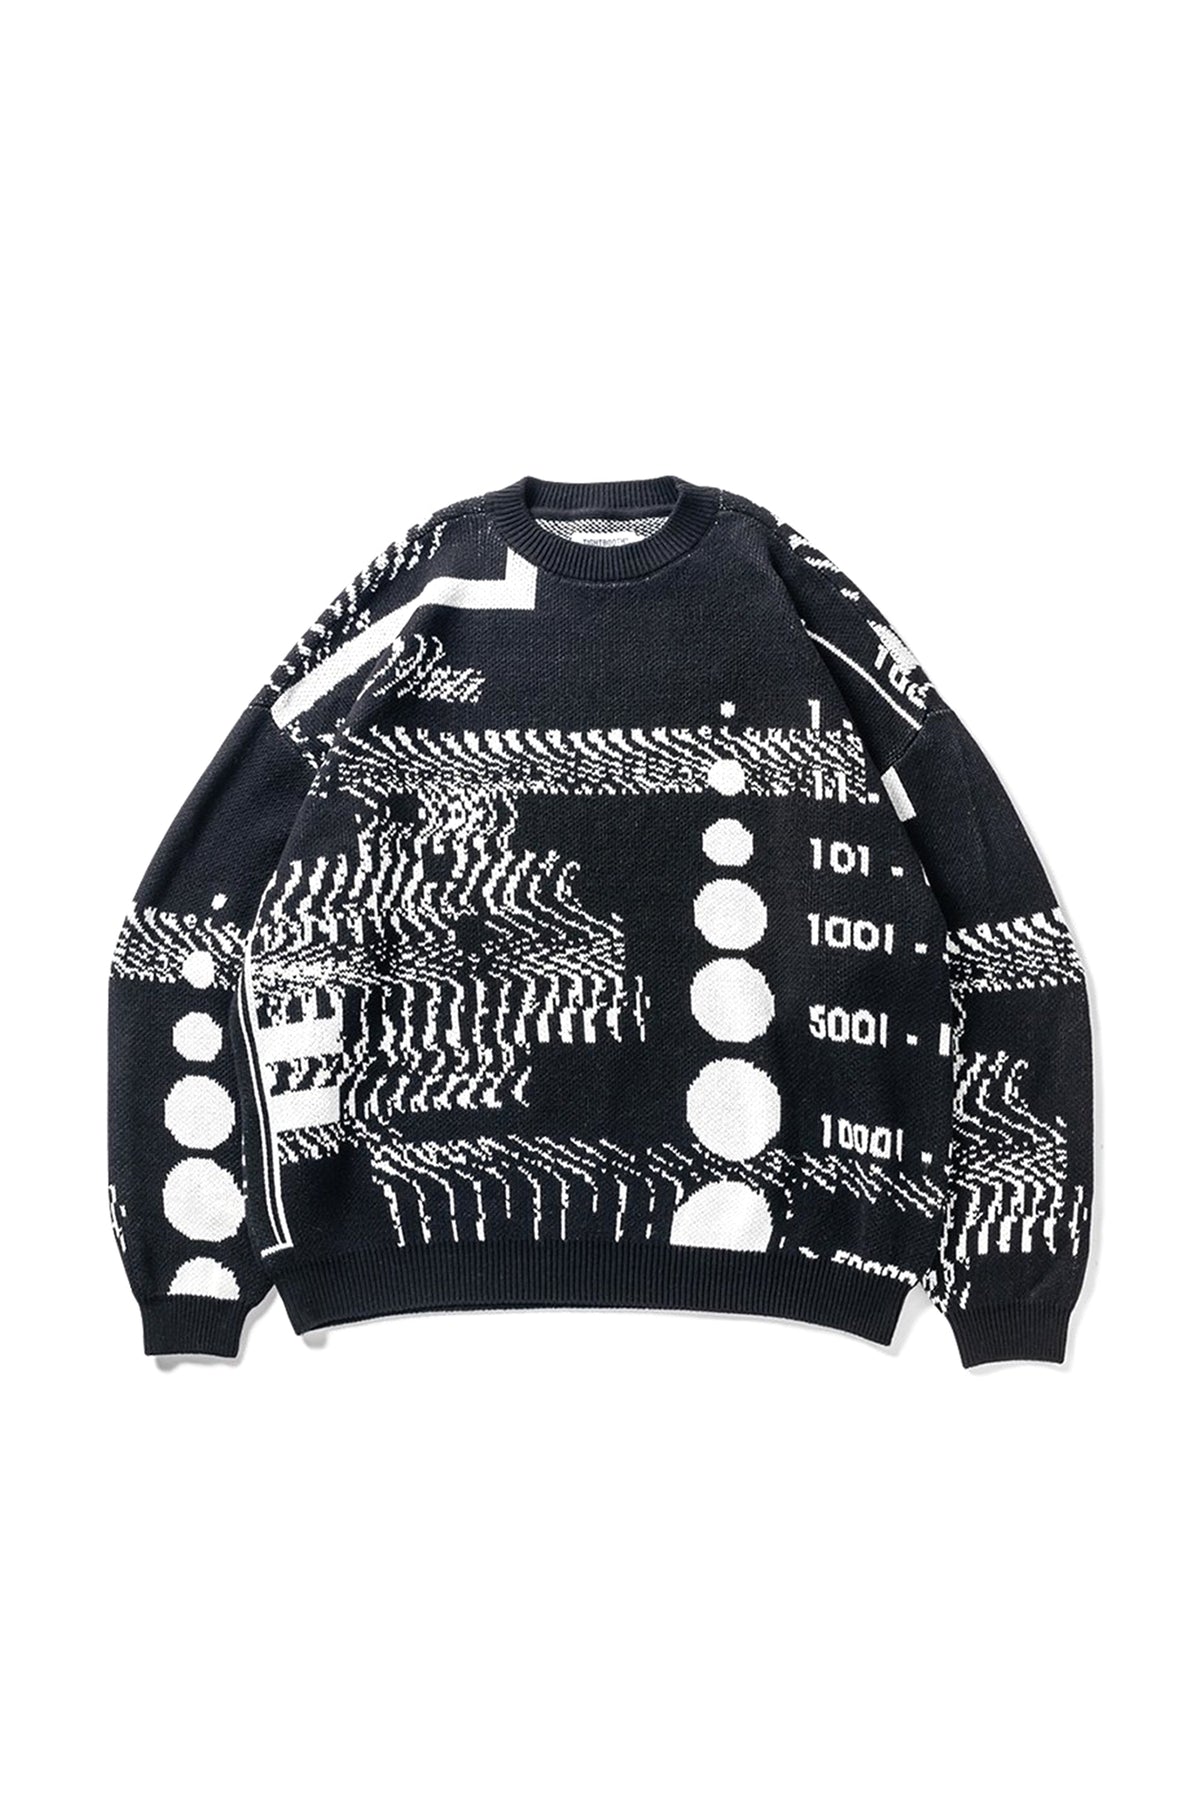 TIGHTBOOTH COVID-19 KNIT SWEATER / BLK